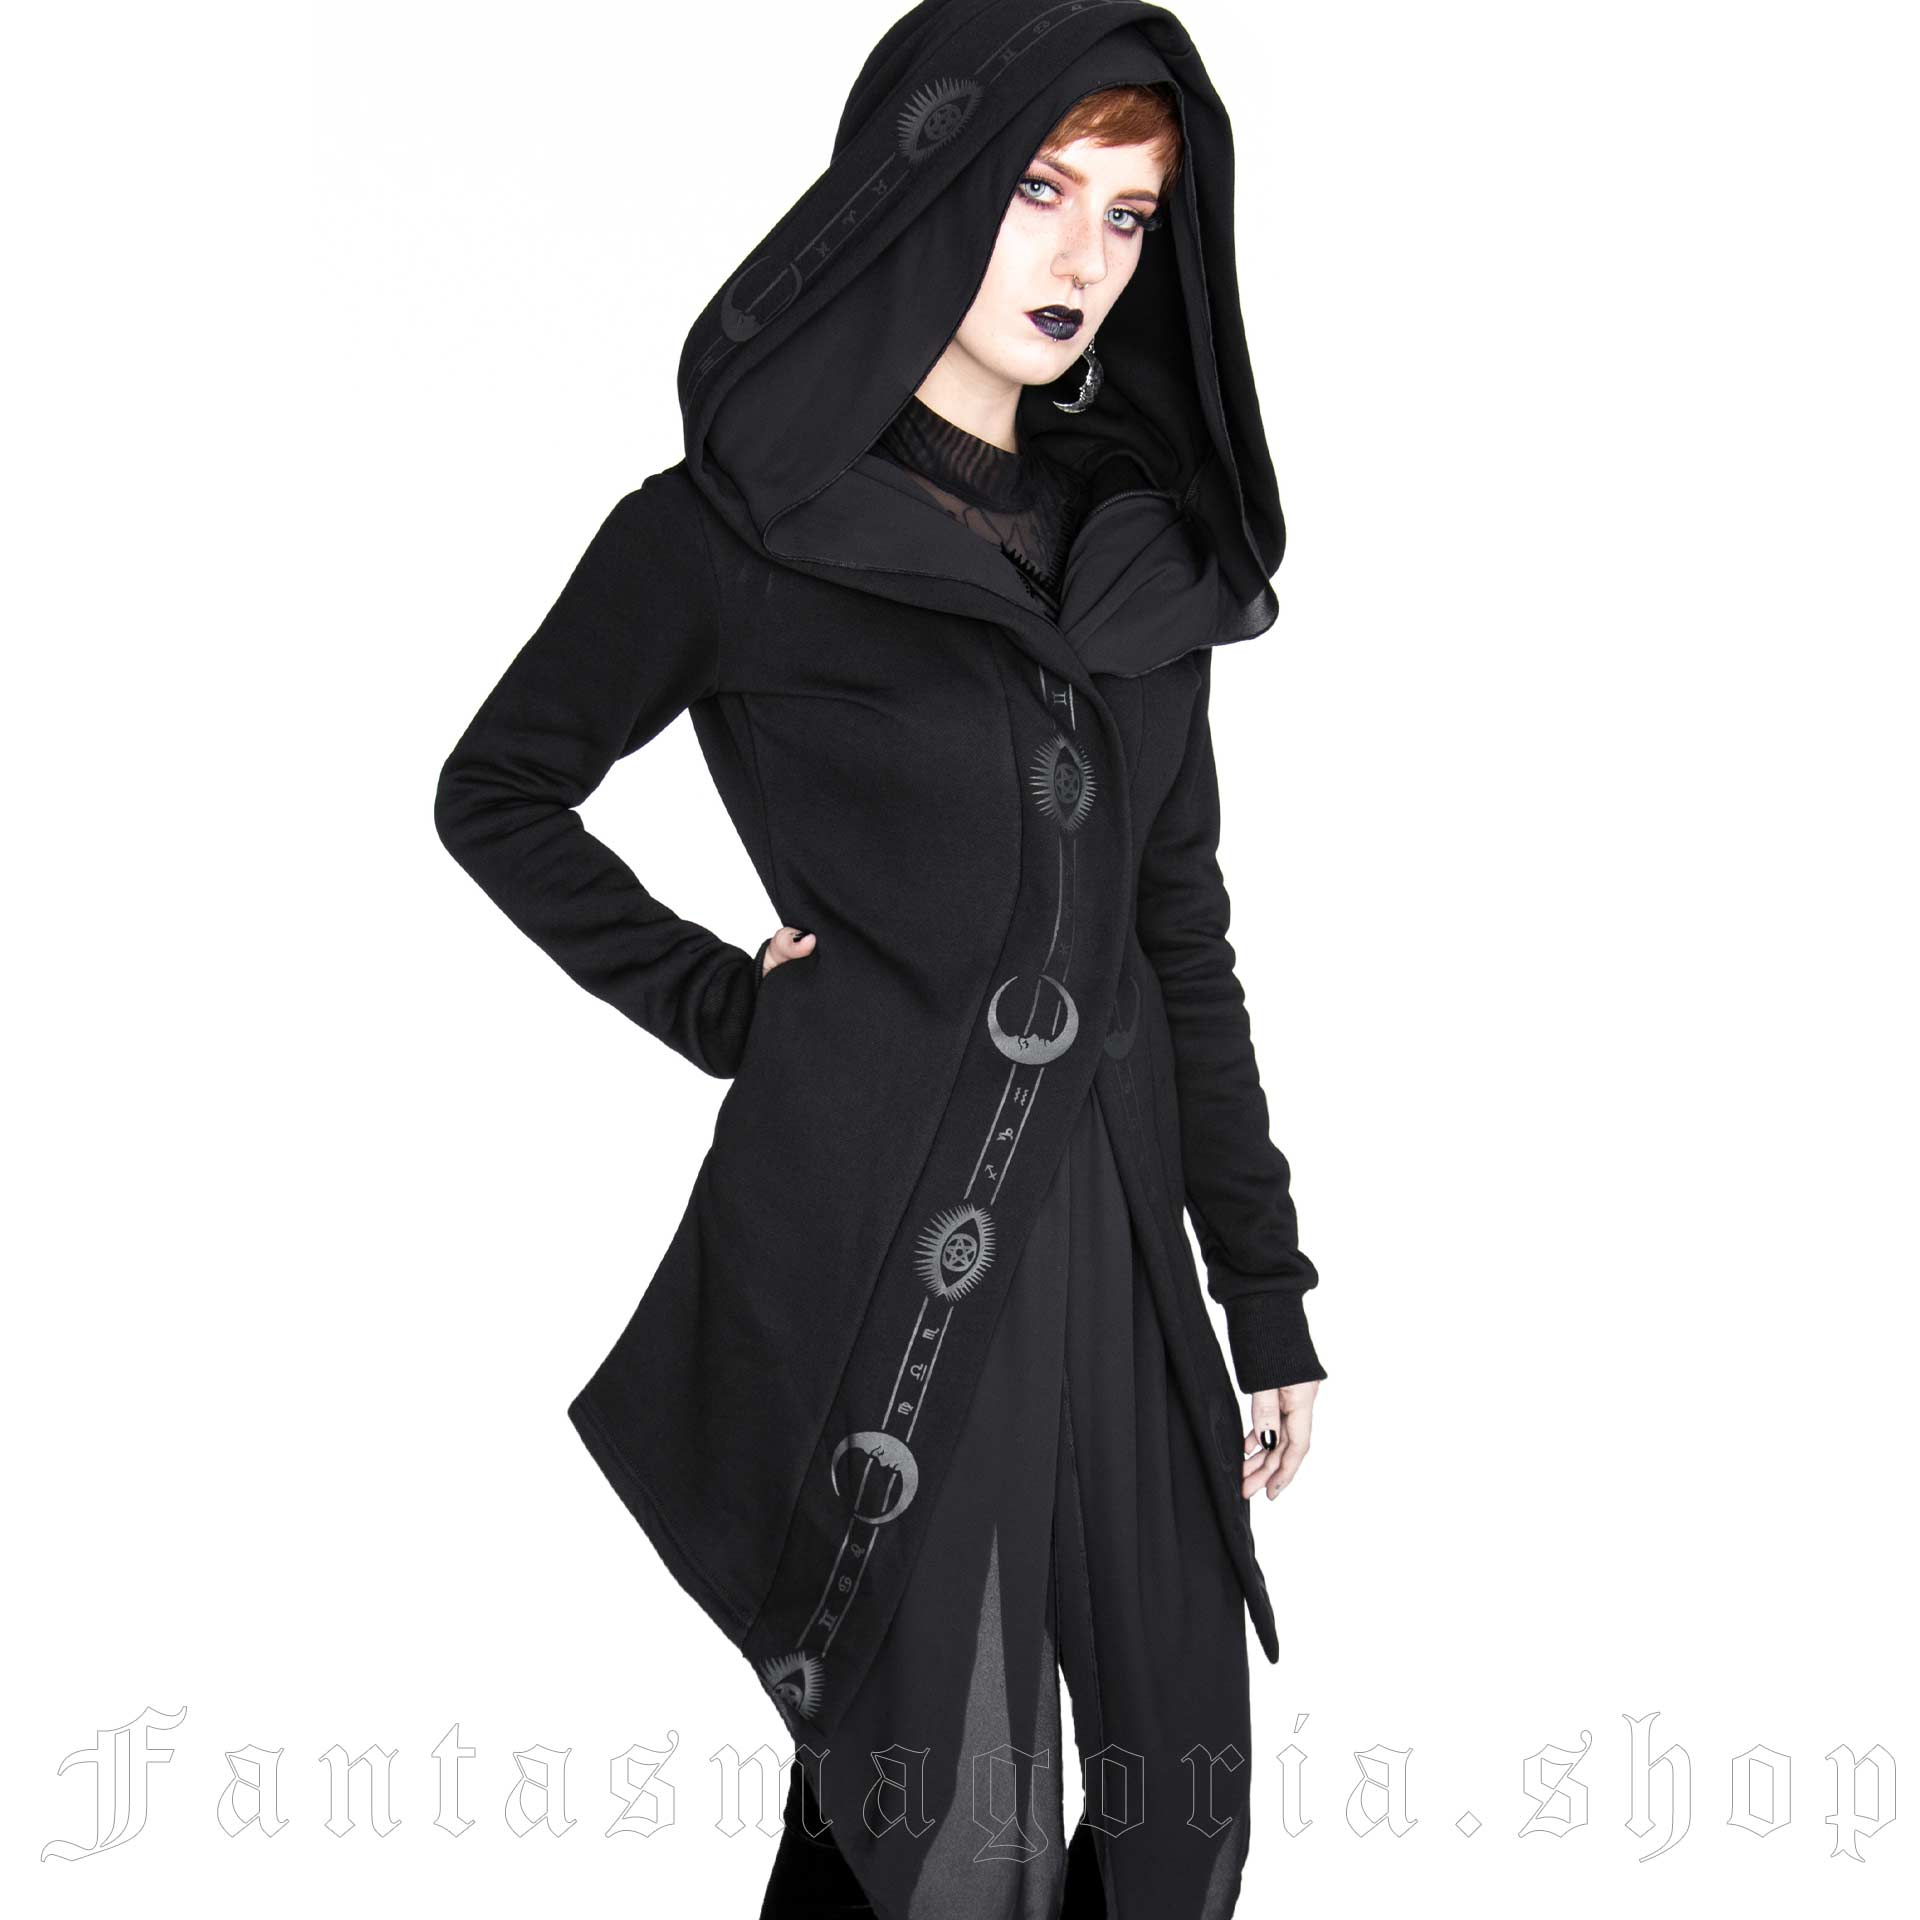 Fortune Teller Hoodie by RESTYLE brand